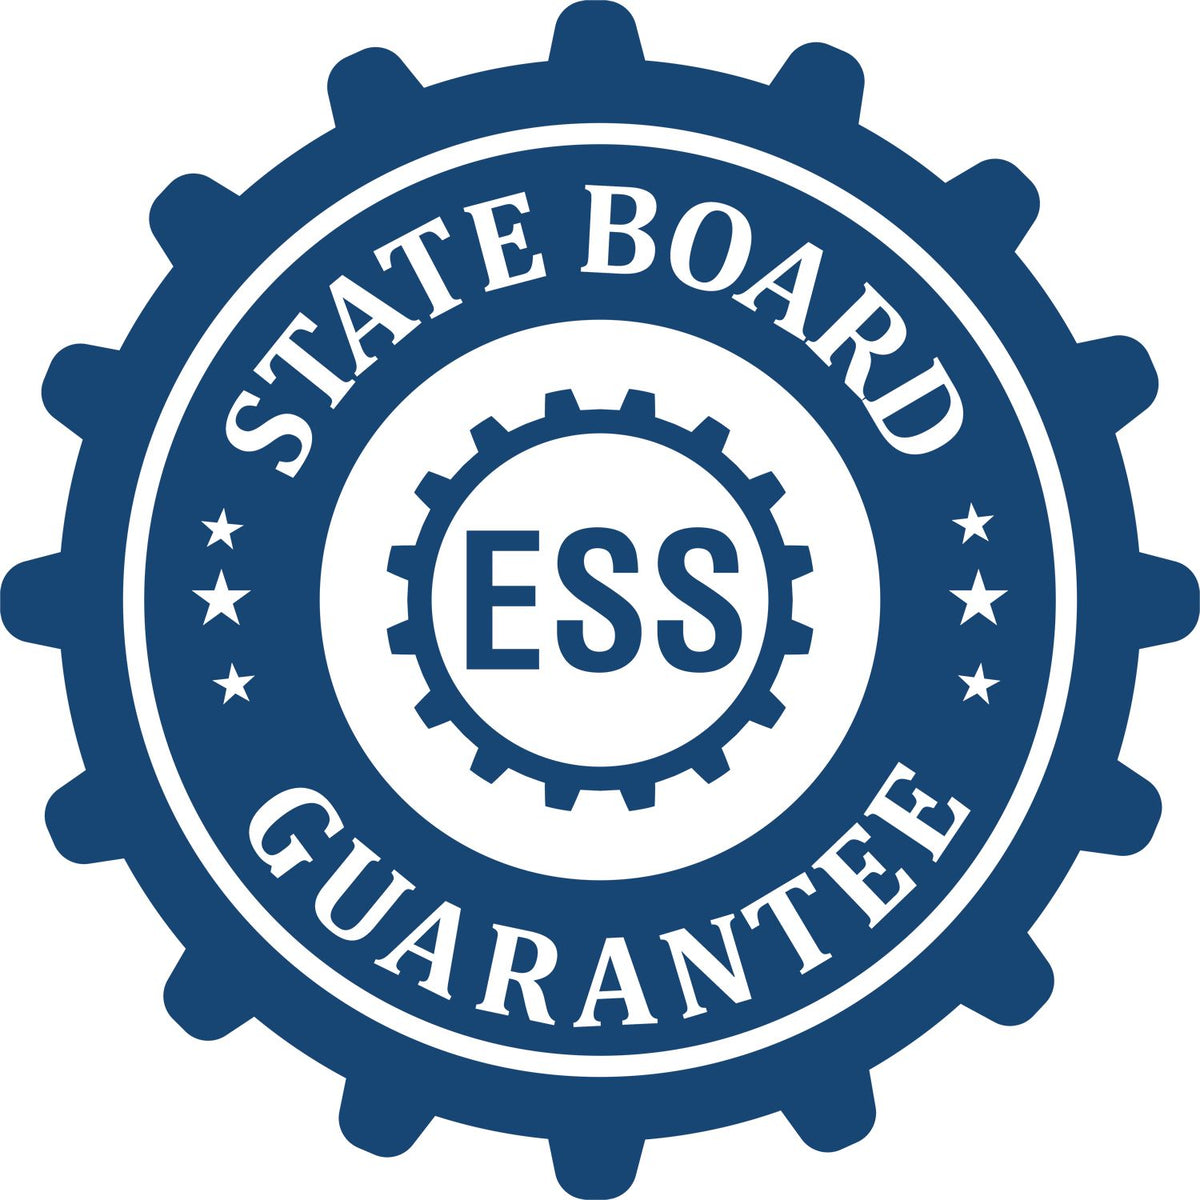 An emblem in a gear shape illustrating a state board guarantee for the Hybrid Hawaii Geologist Seal